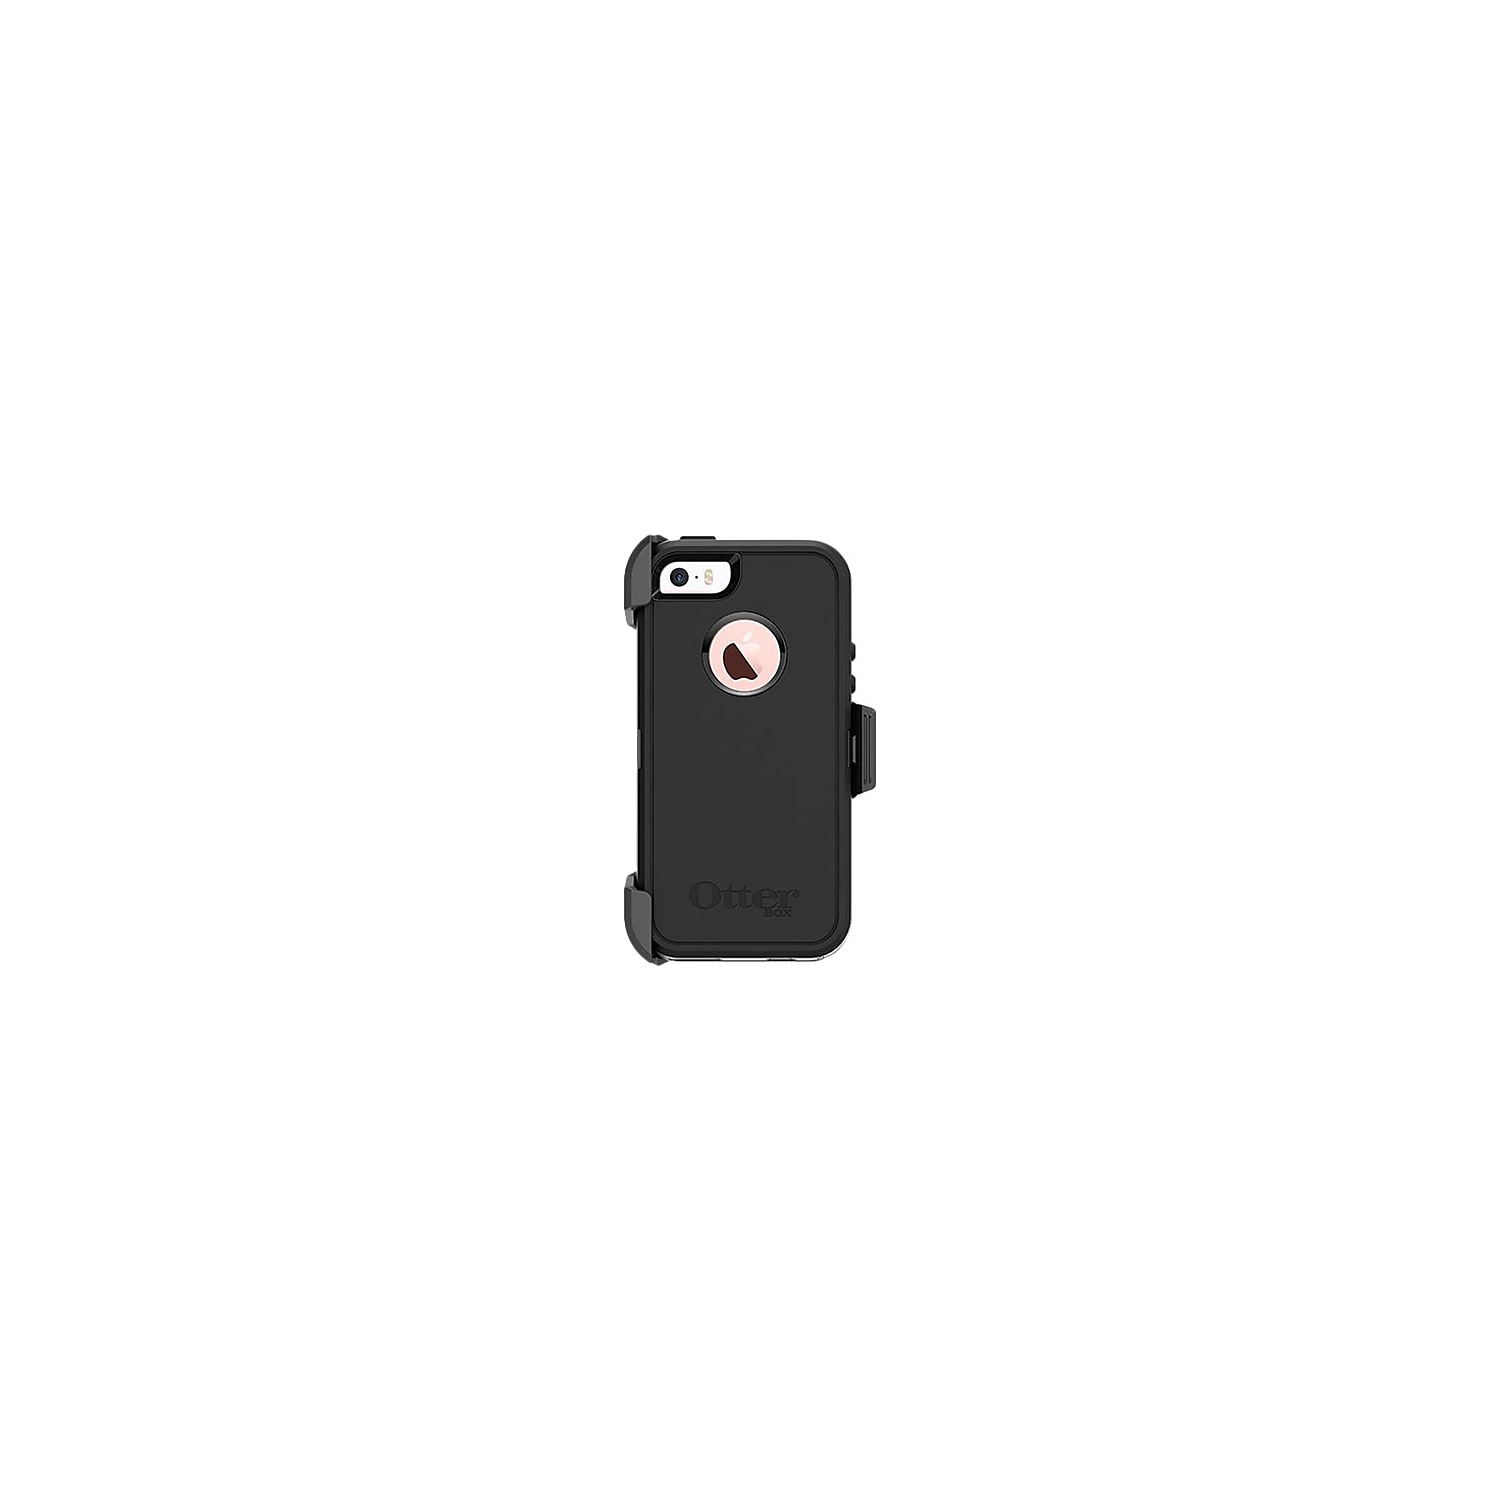 OtterBox Defender Carrying Case (Holster) iPhone 5, iPhone 5S, iPhone SE - Black - image 2 of 7